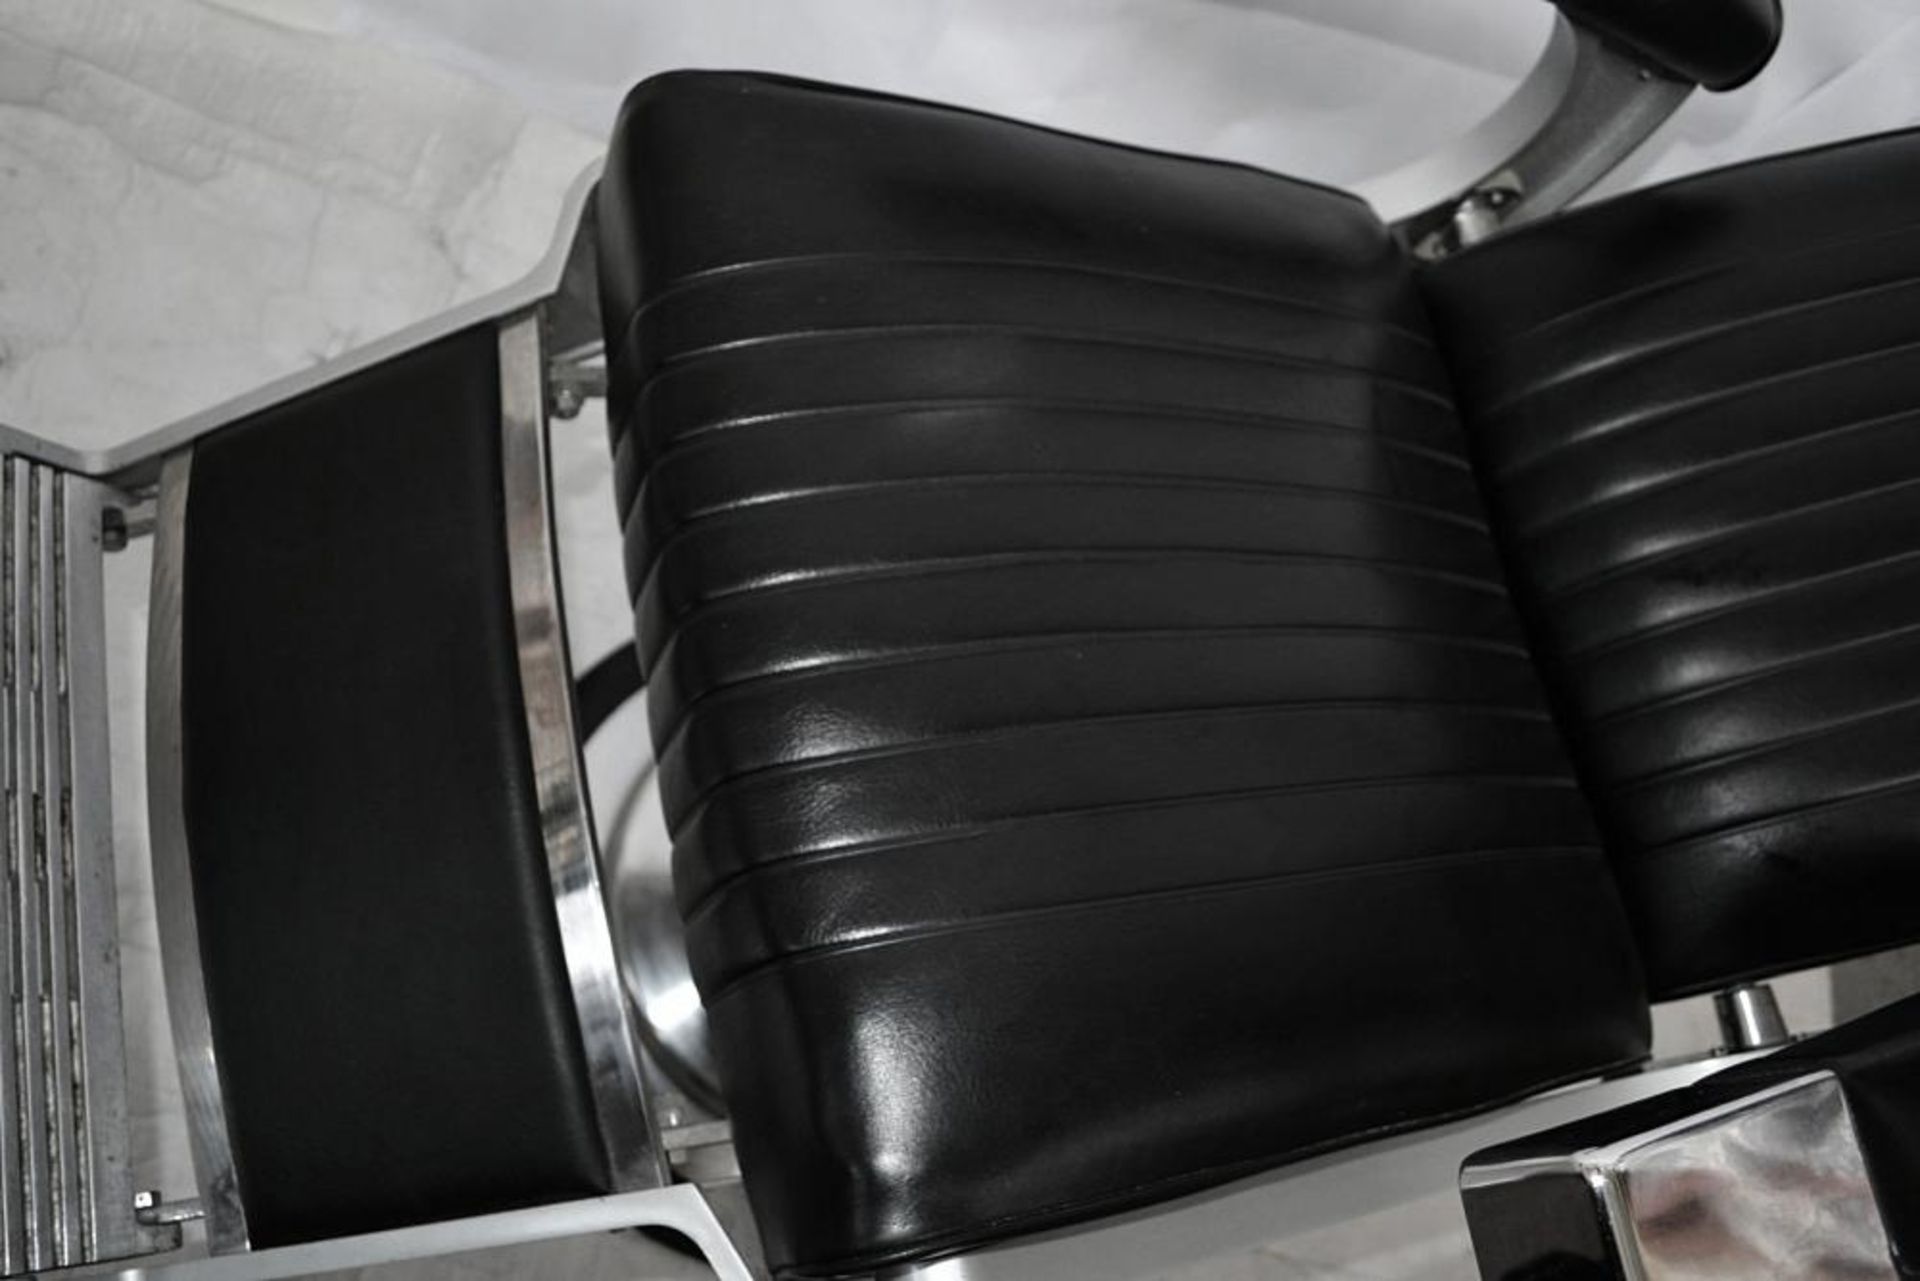 1 x Takara BELMONT "Apollo 2" Barbers Chair - Recently Taken From A Premier West-End Male Grooming S - Image 12 of 19